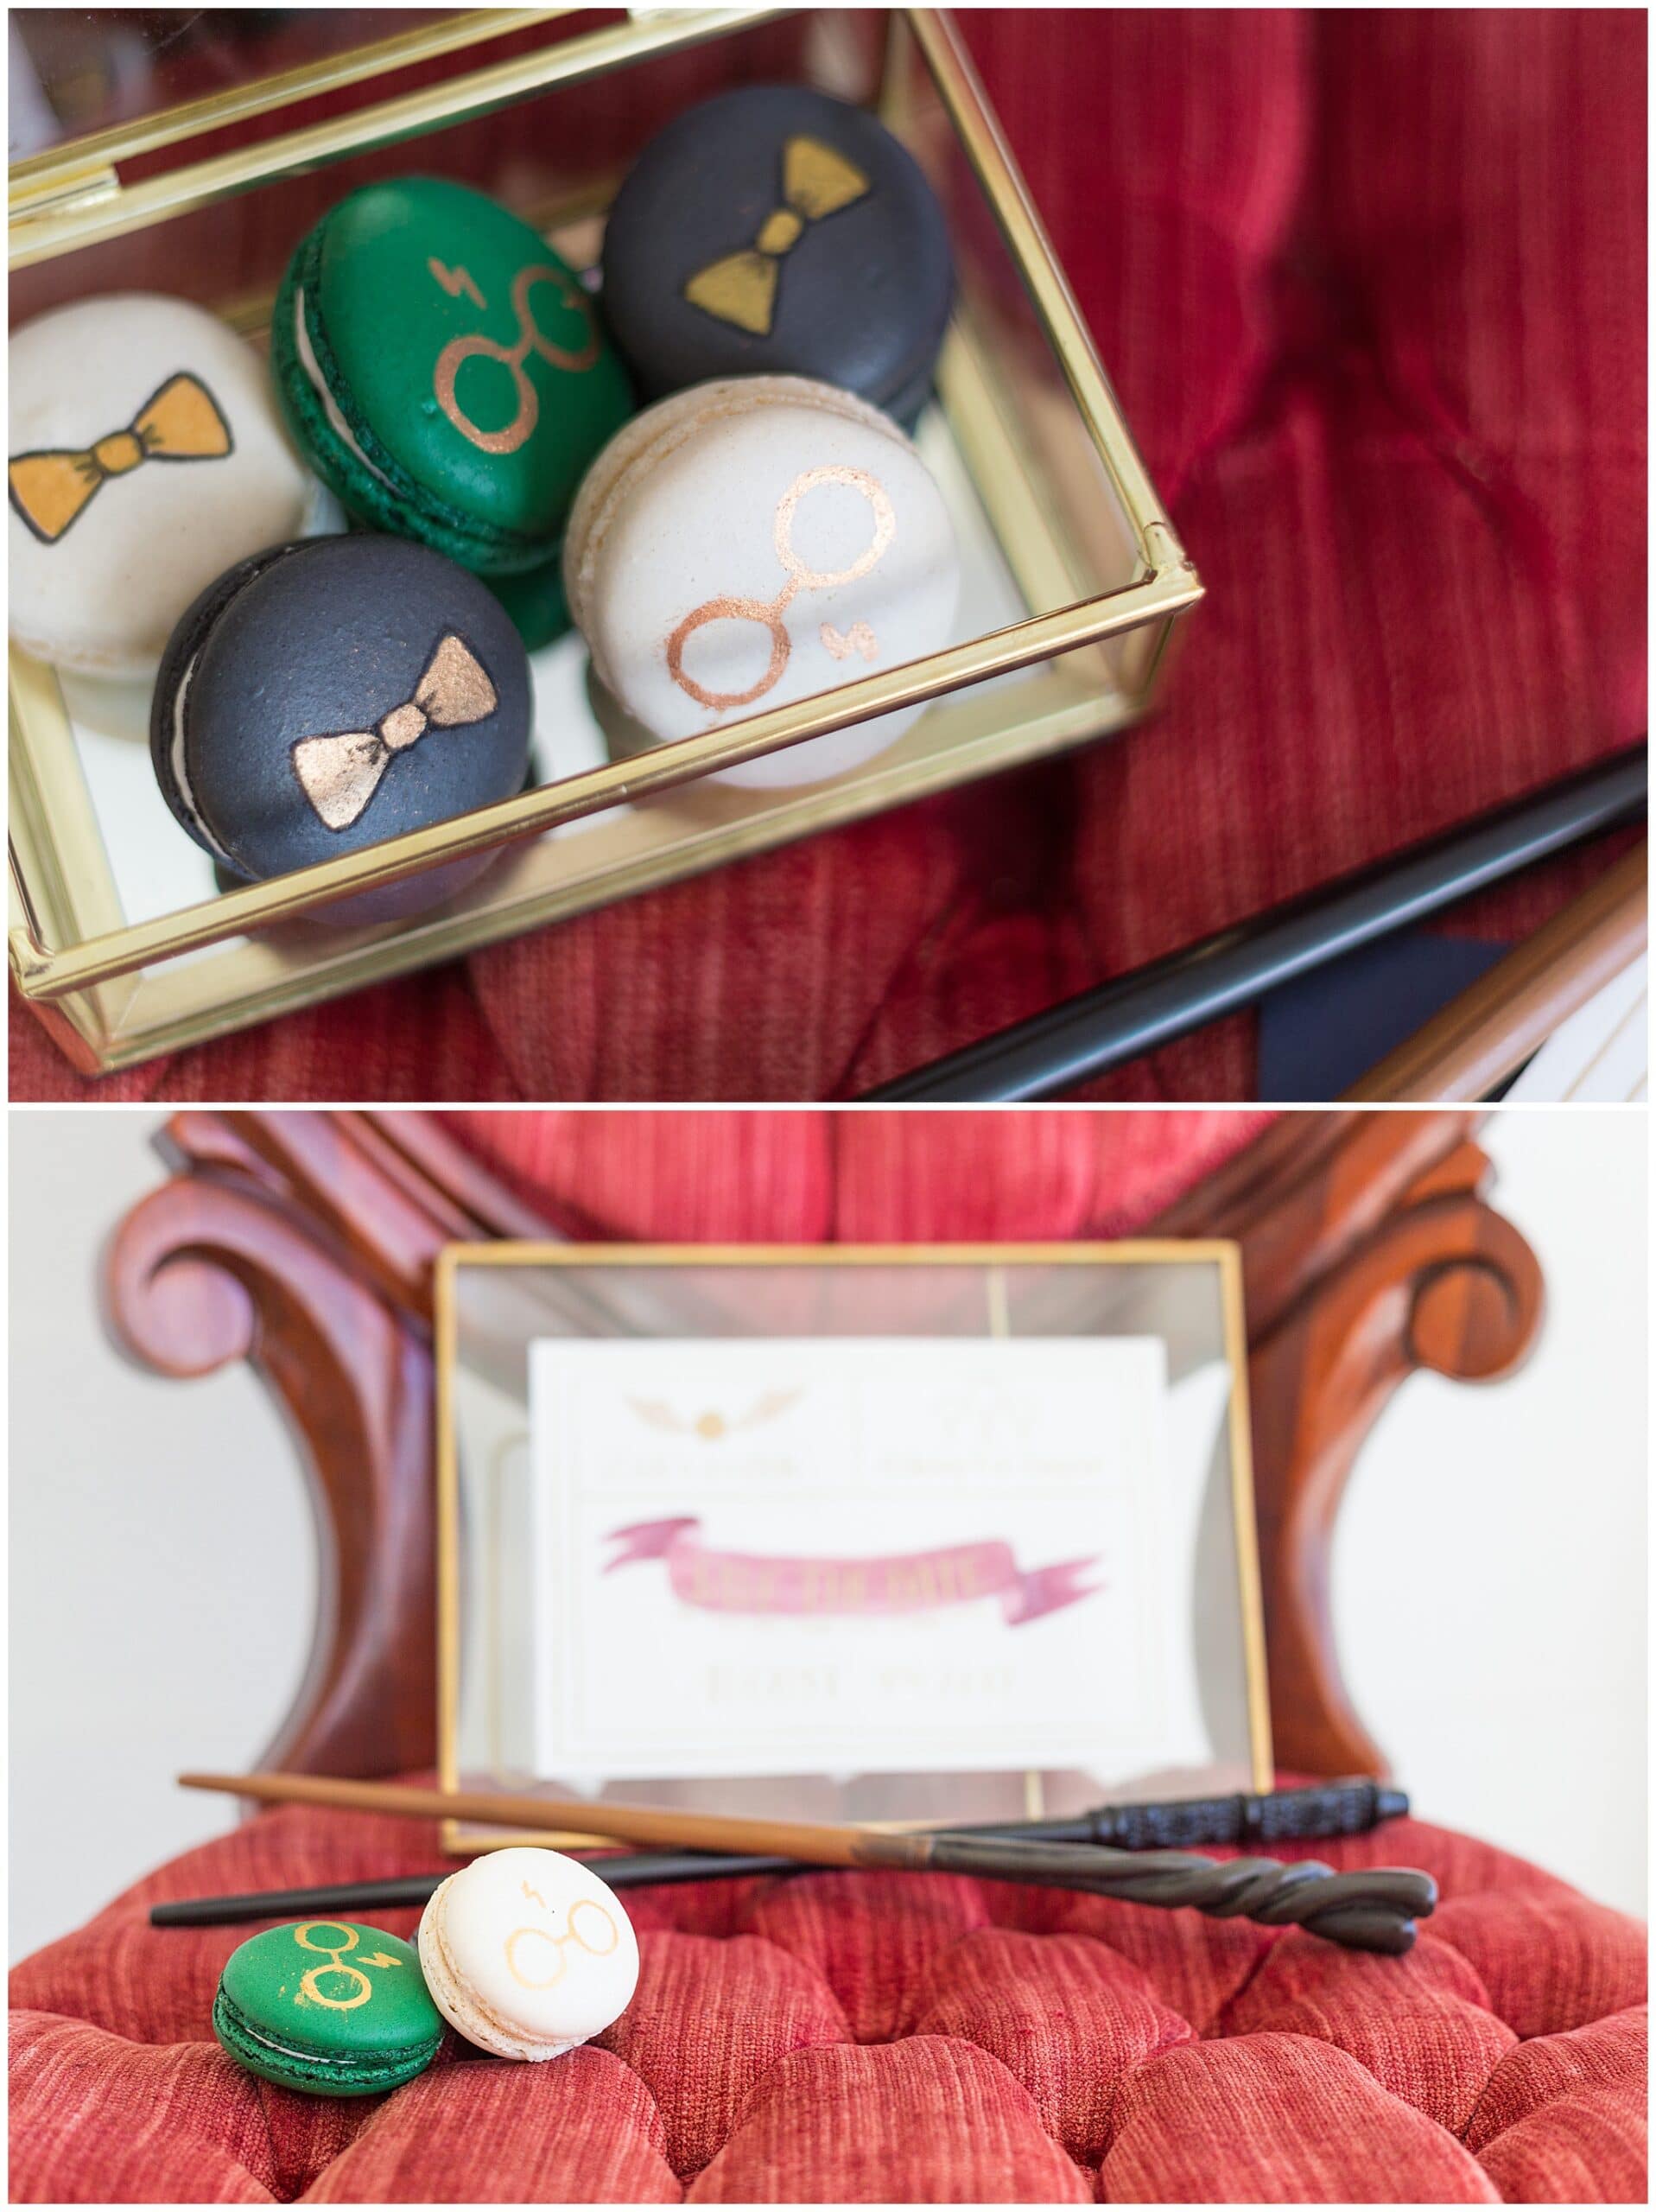 Harry Potter macrons made by Wink by Erica at the Grand Texana in Houston Texas photographed by Swish and Click Photography